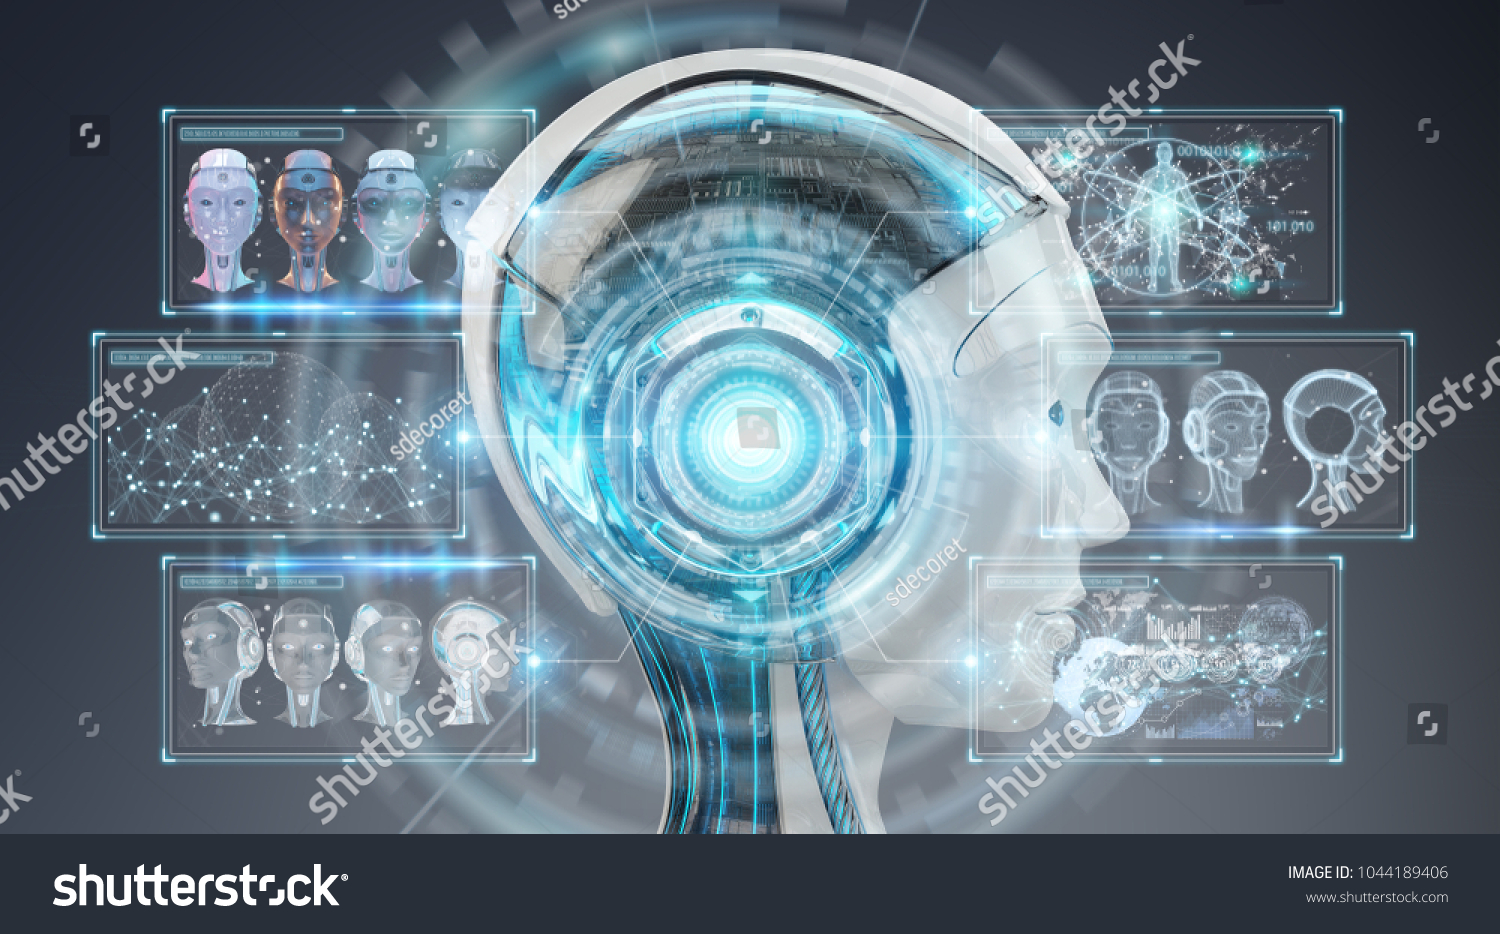 Digital artificial intelligence cyborg interface isolated on grey background 3D rendering #1044189406